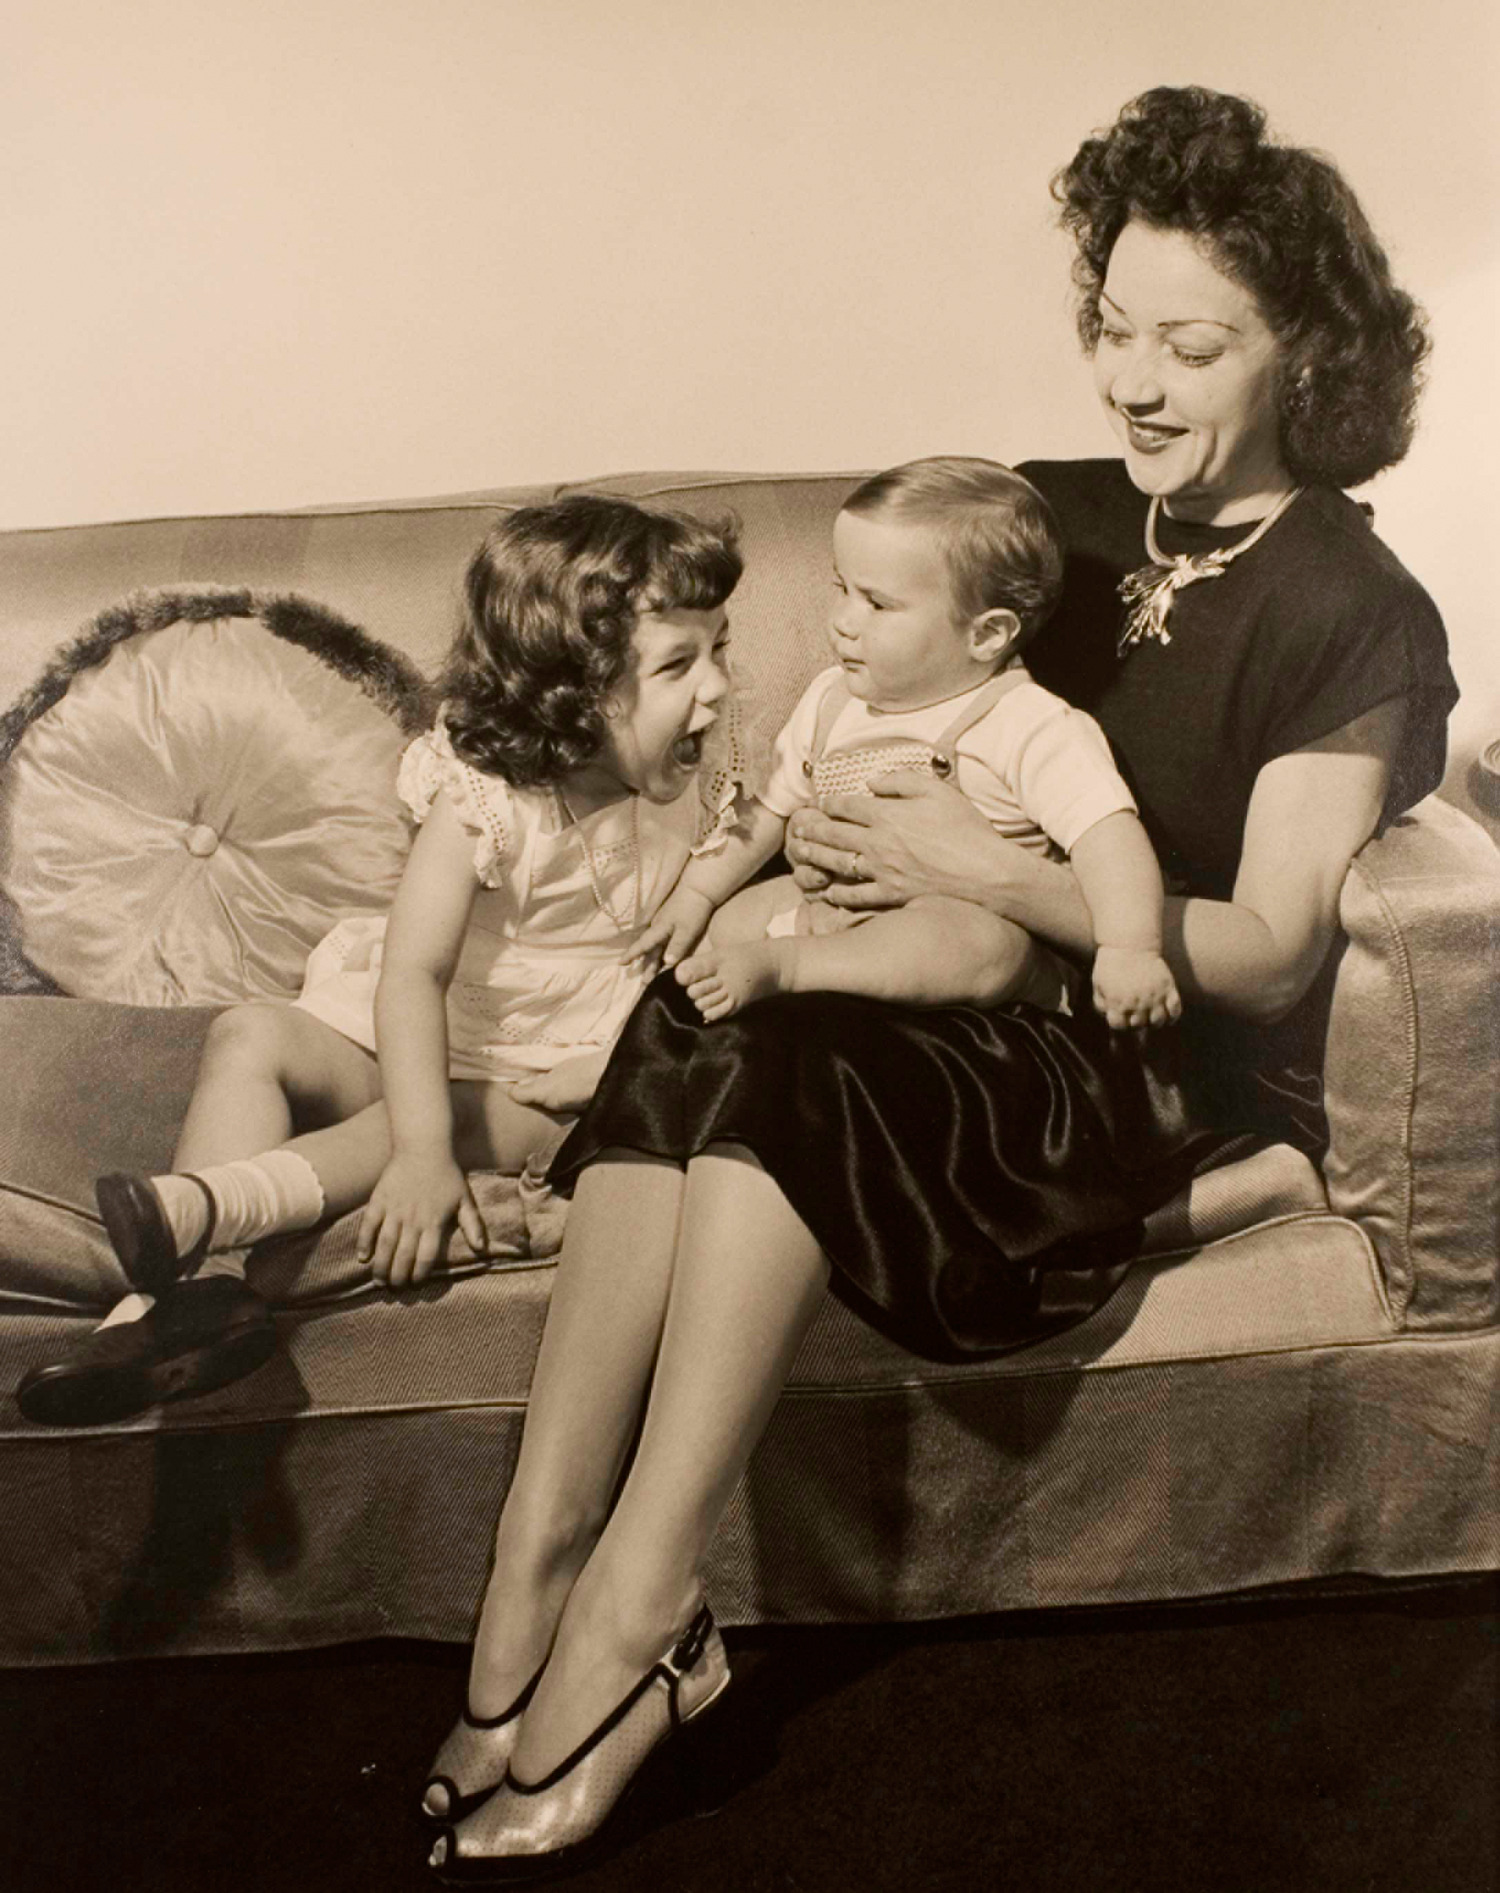 Philippe Halsman holds her two children on a couch